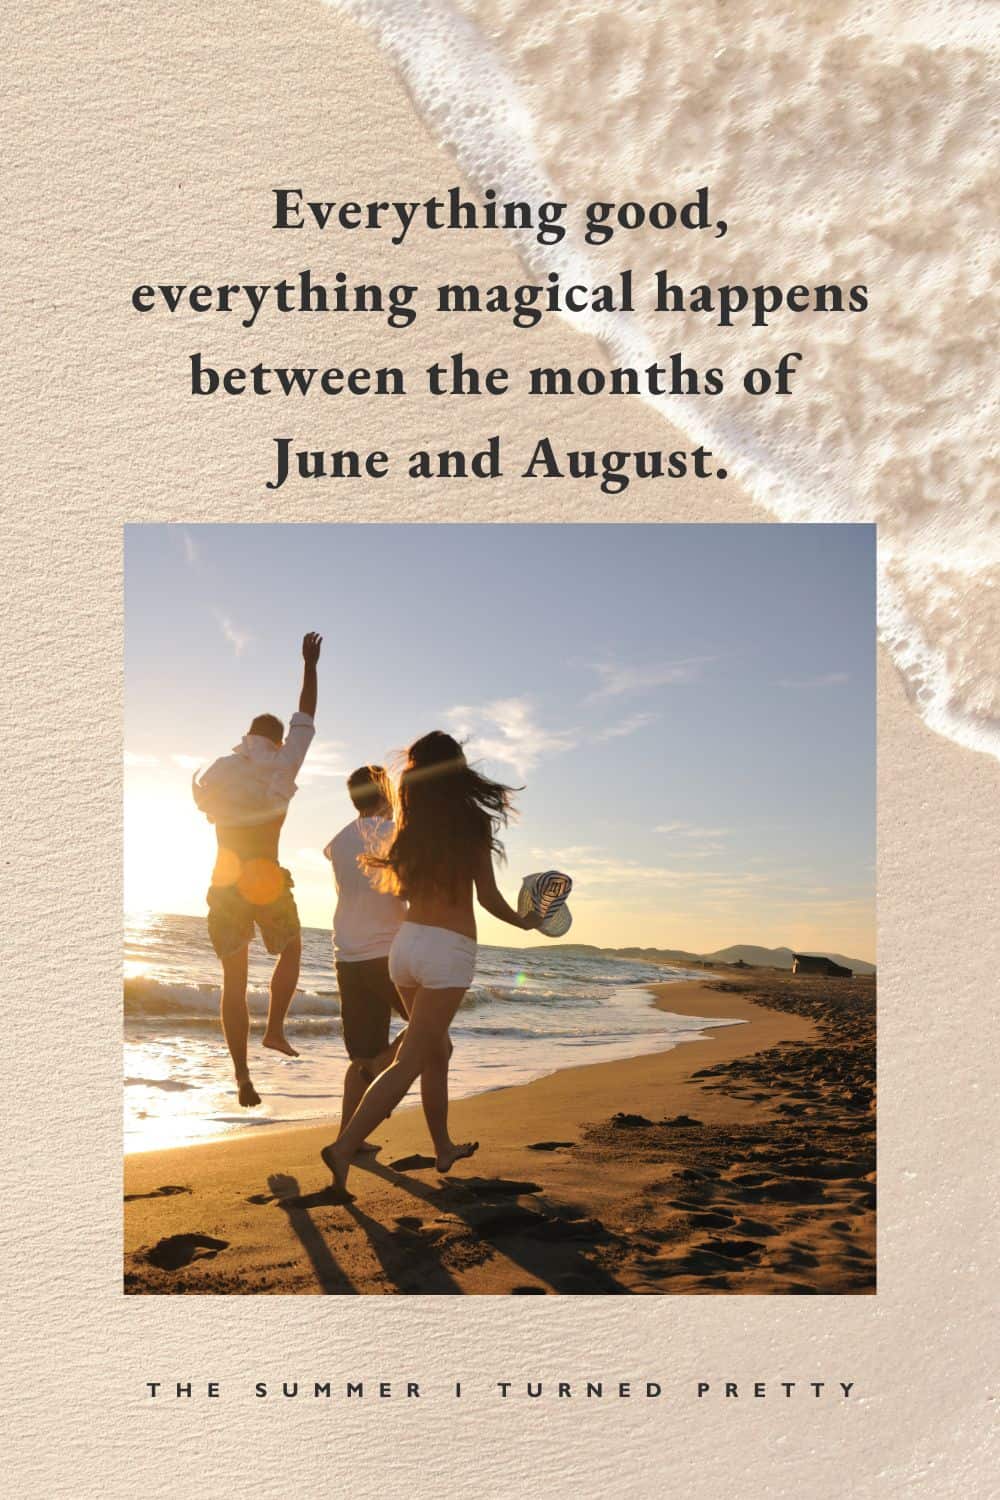 Everything good, everything magical happens between the months of June and August.